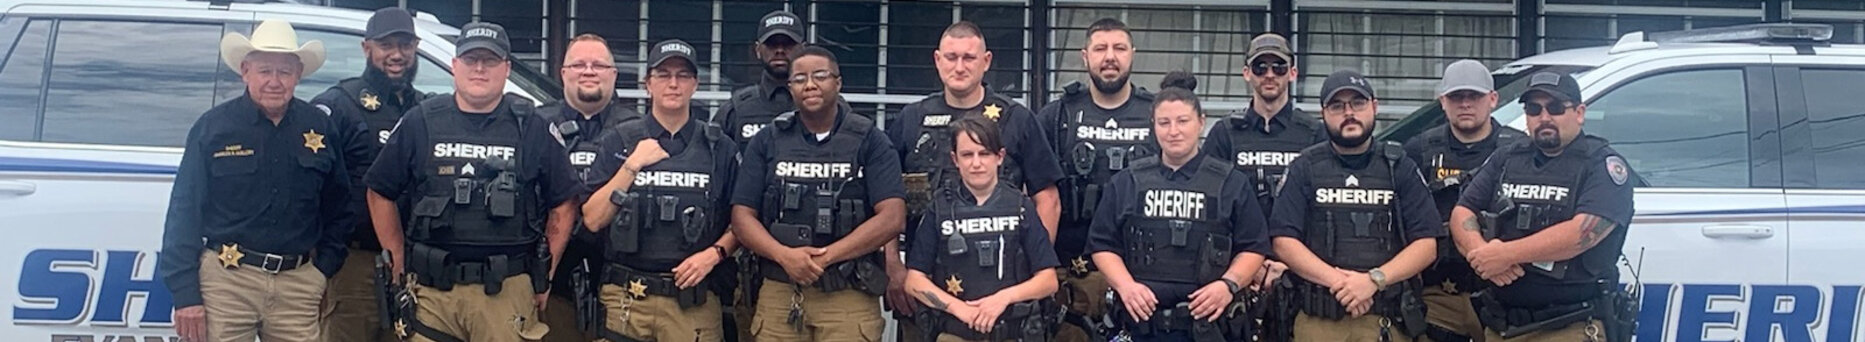 Evangeline Sheriff's Office Staff standing in front of sheriff vehicles